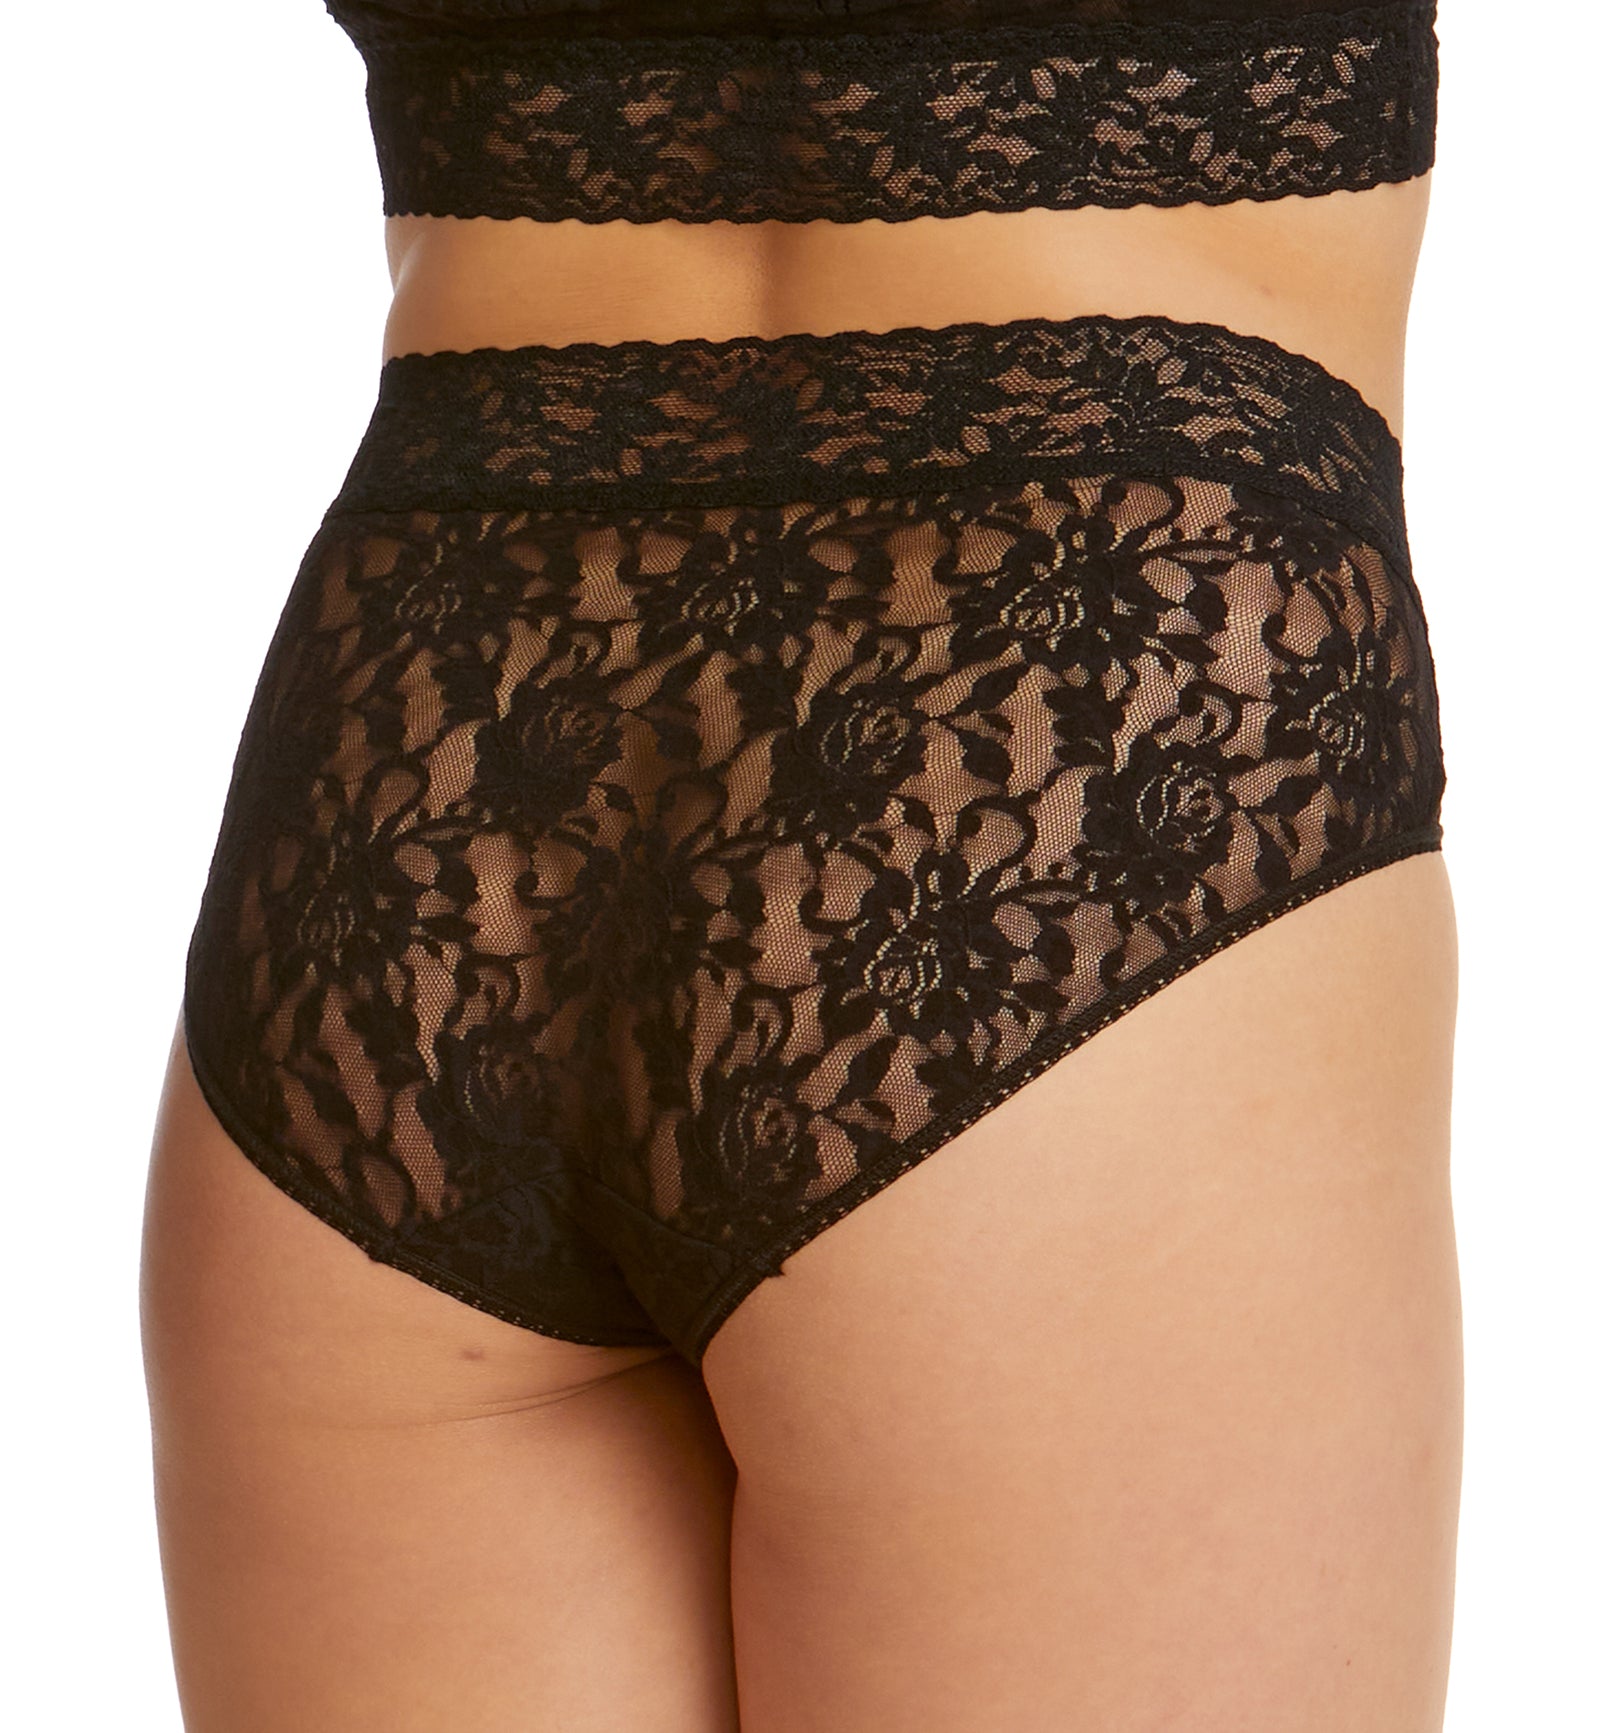 Hanky Panky Signature Lace French Brief (461),Small,Black - Black,Small